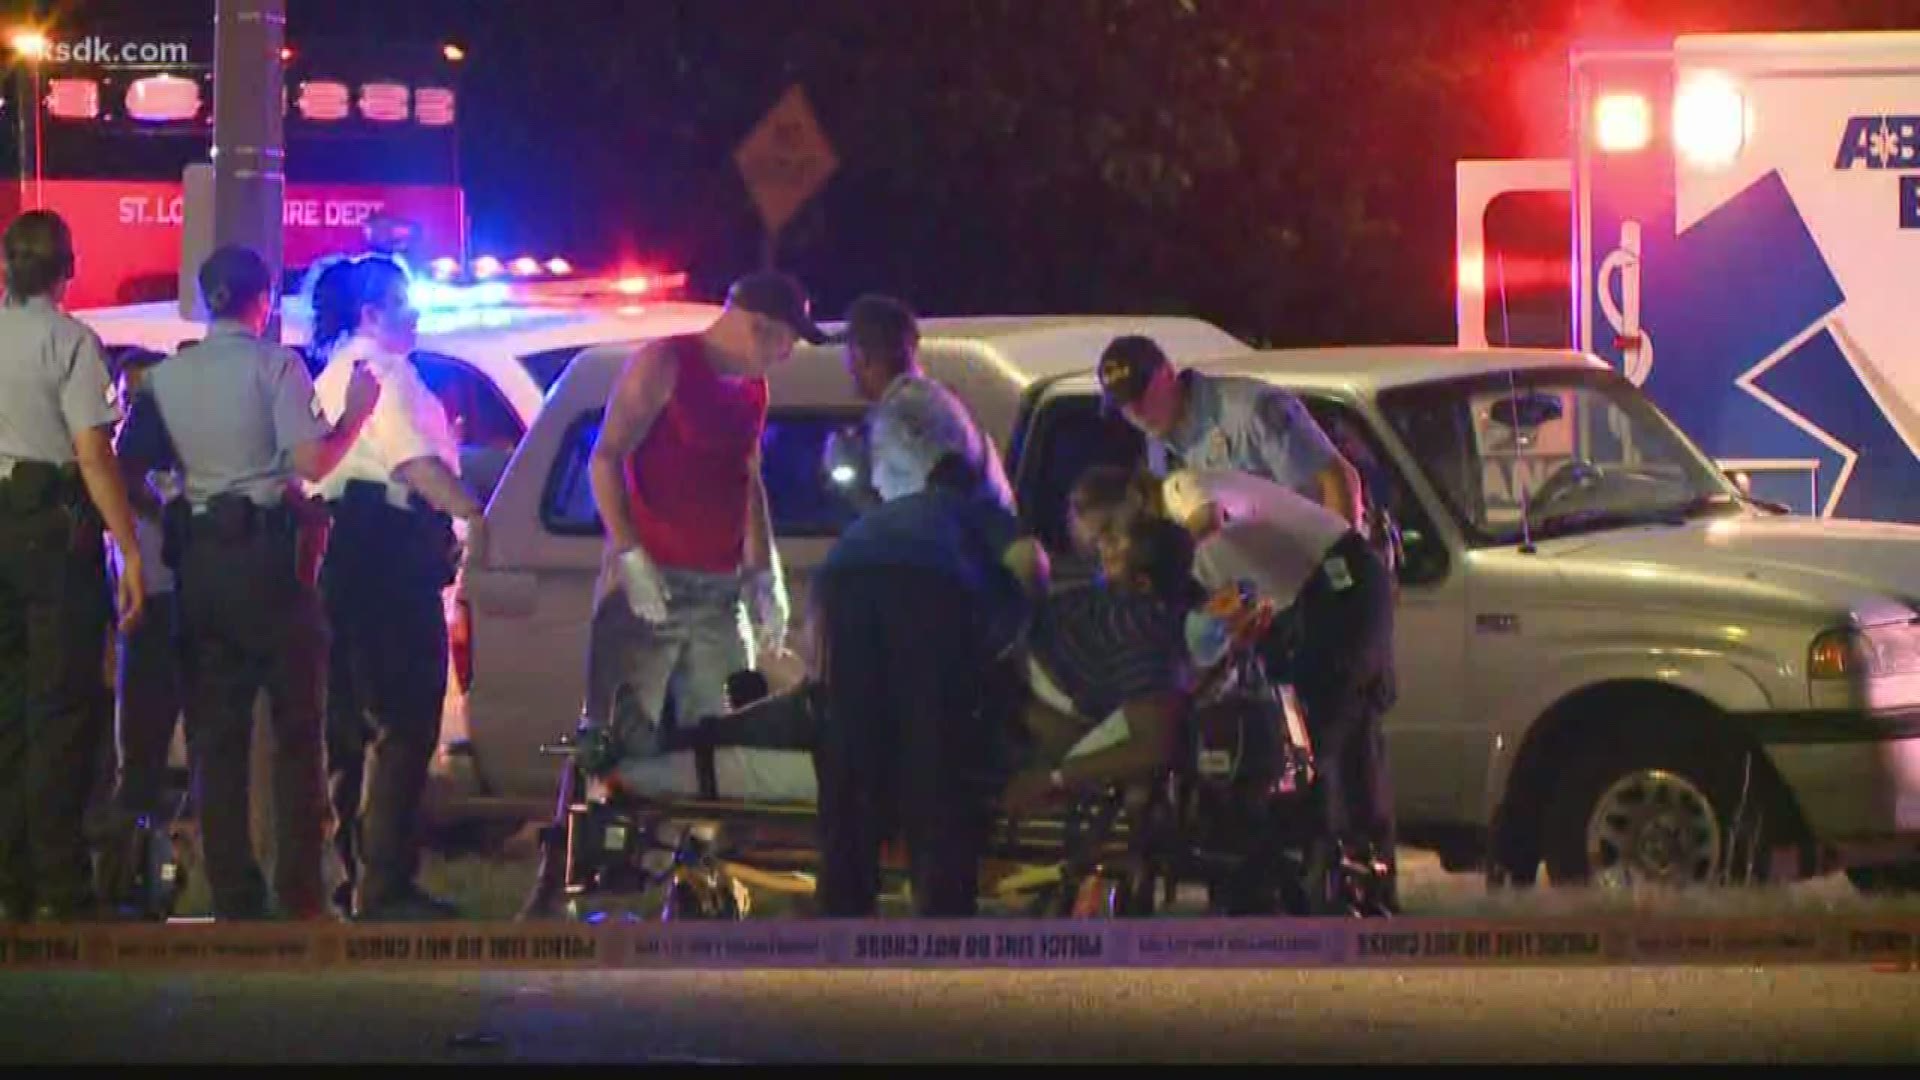 Thirteen children have been shot and killed in St. Louis since the summer began.